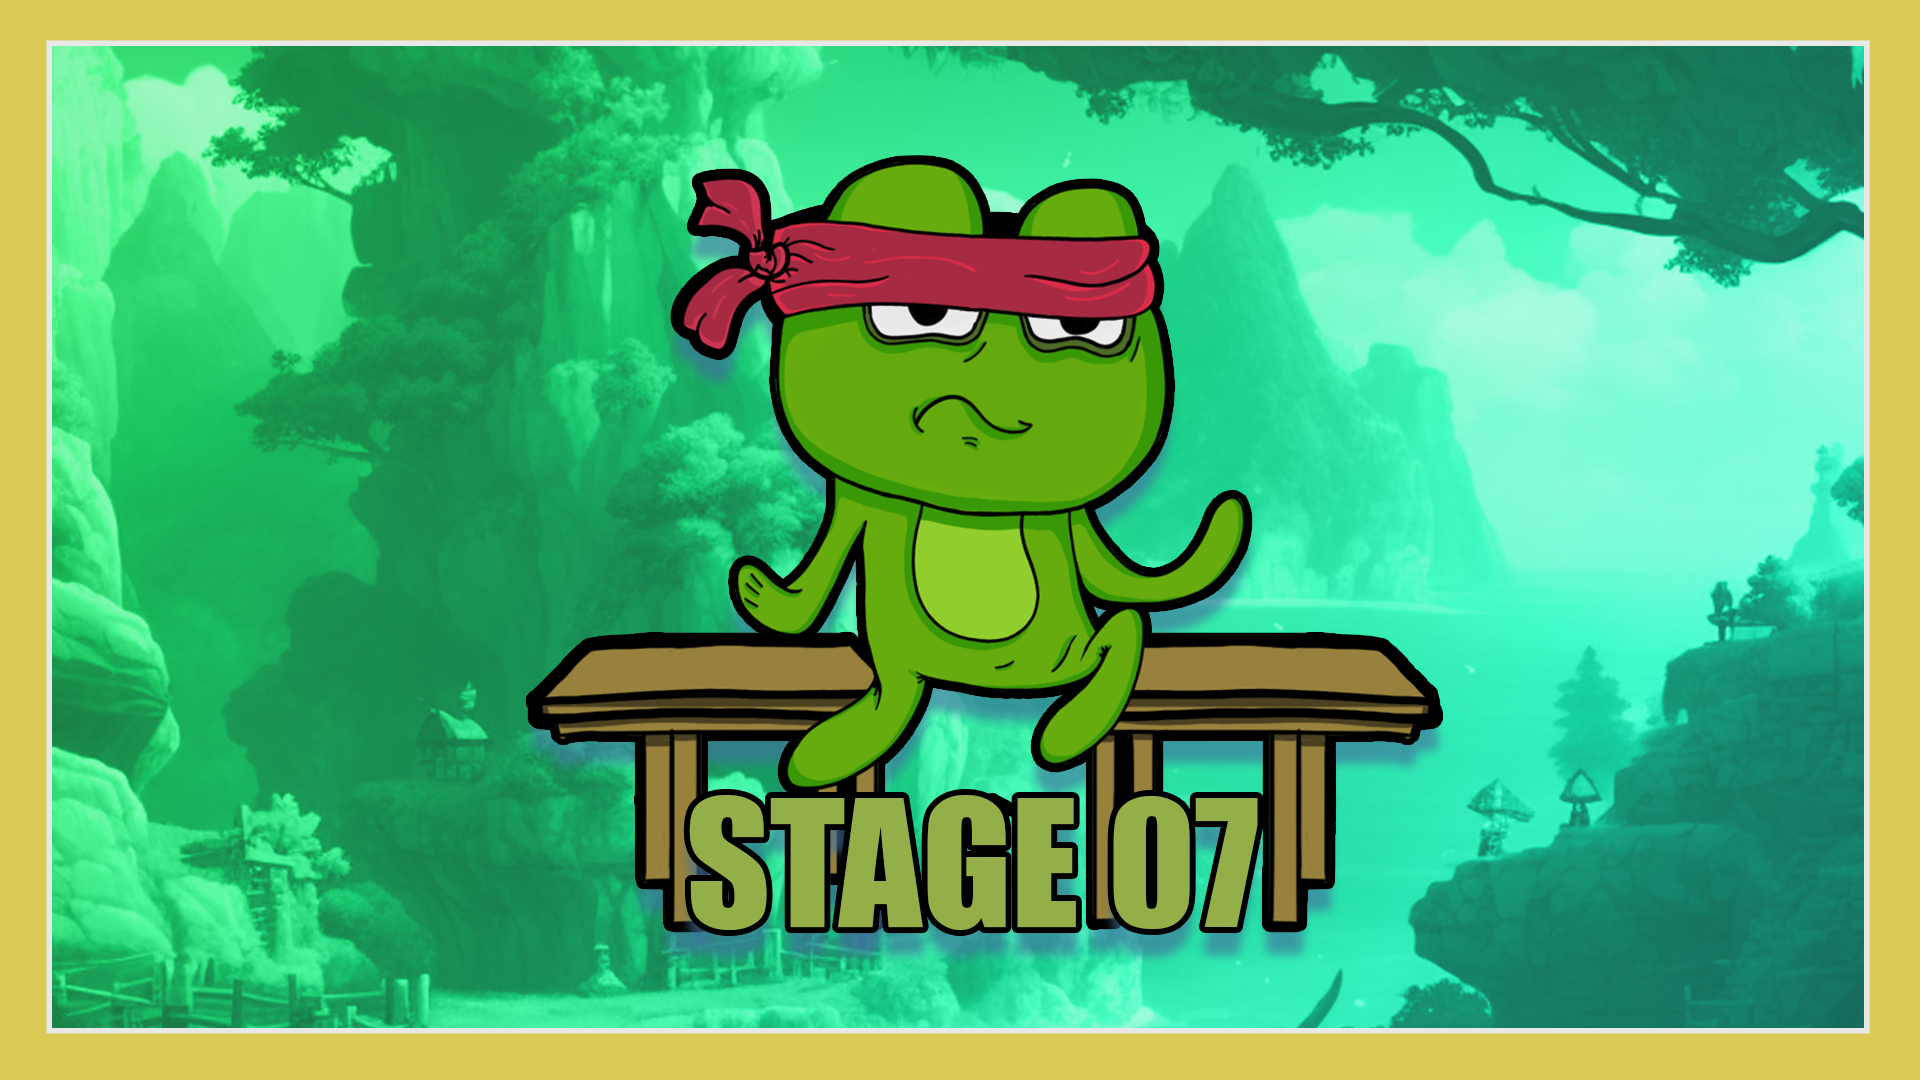 Icon for STAGE 07